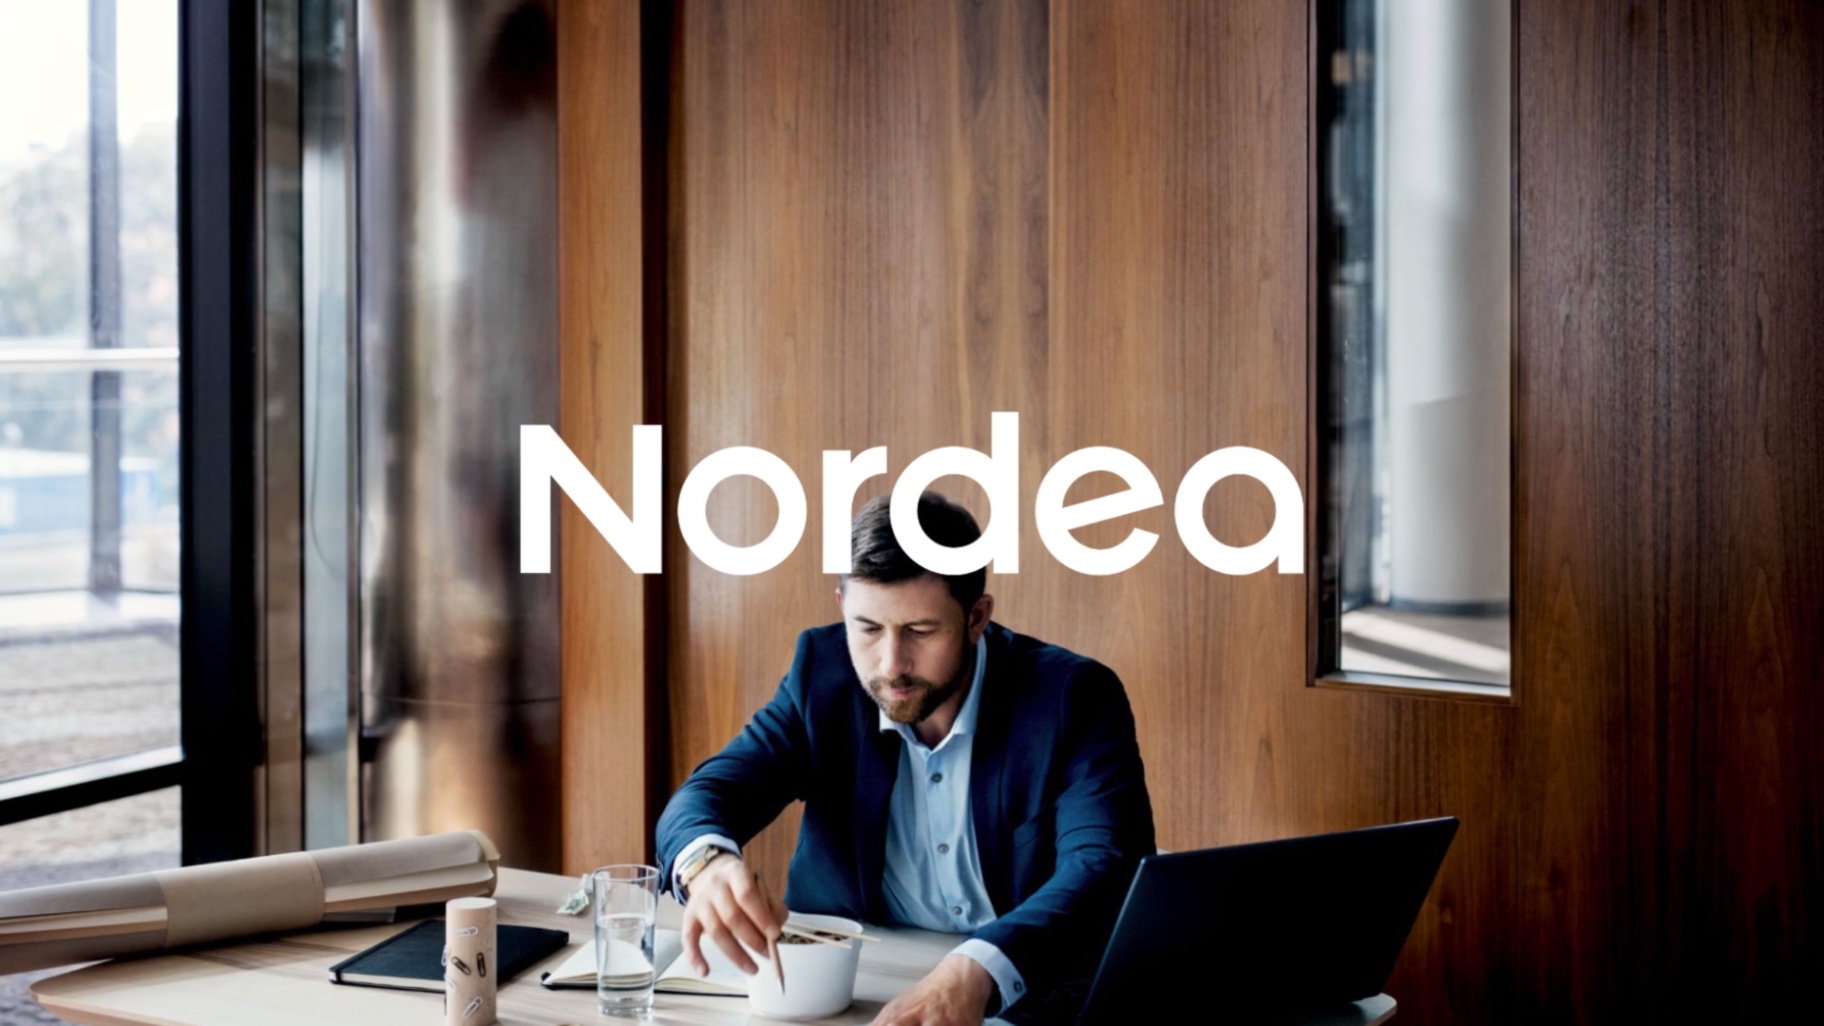 Nordea - Learn How to Work for This Company